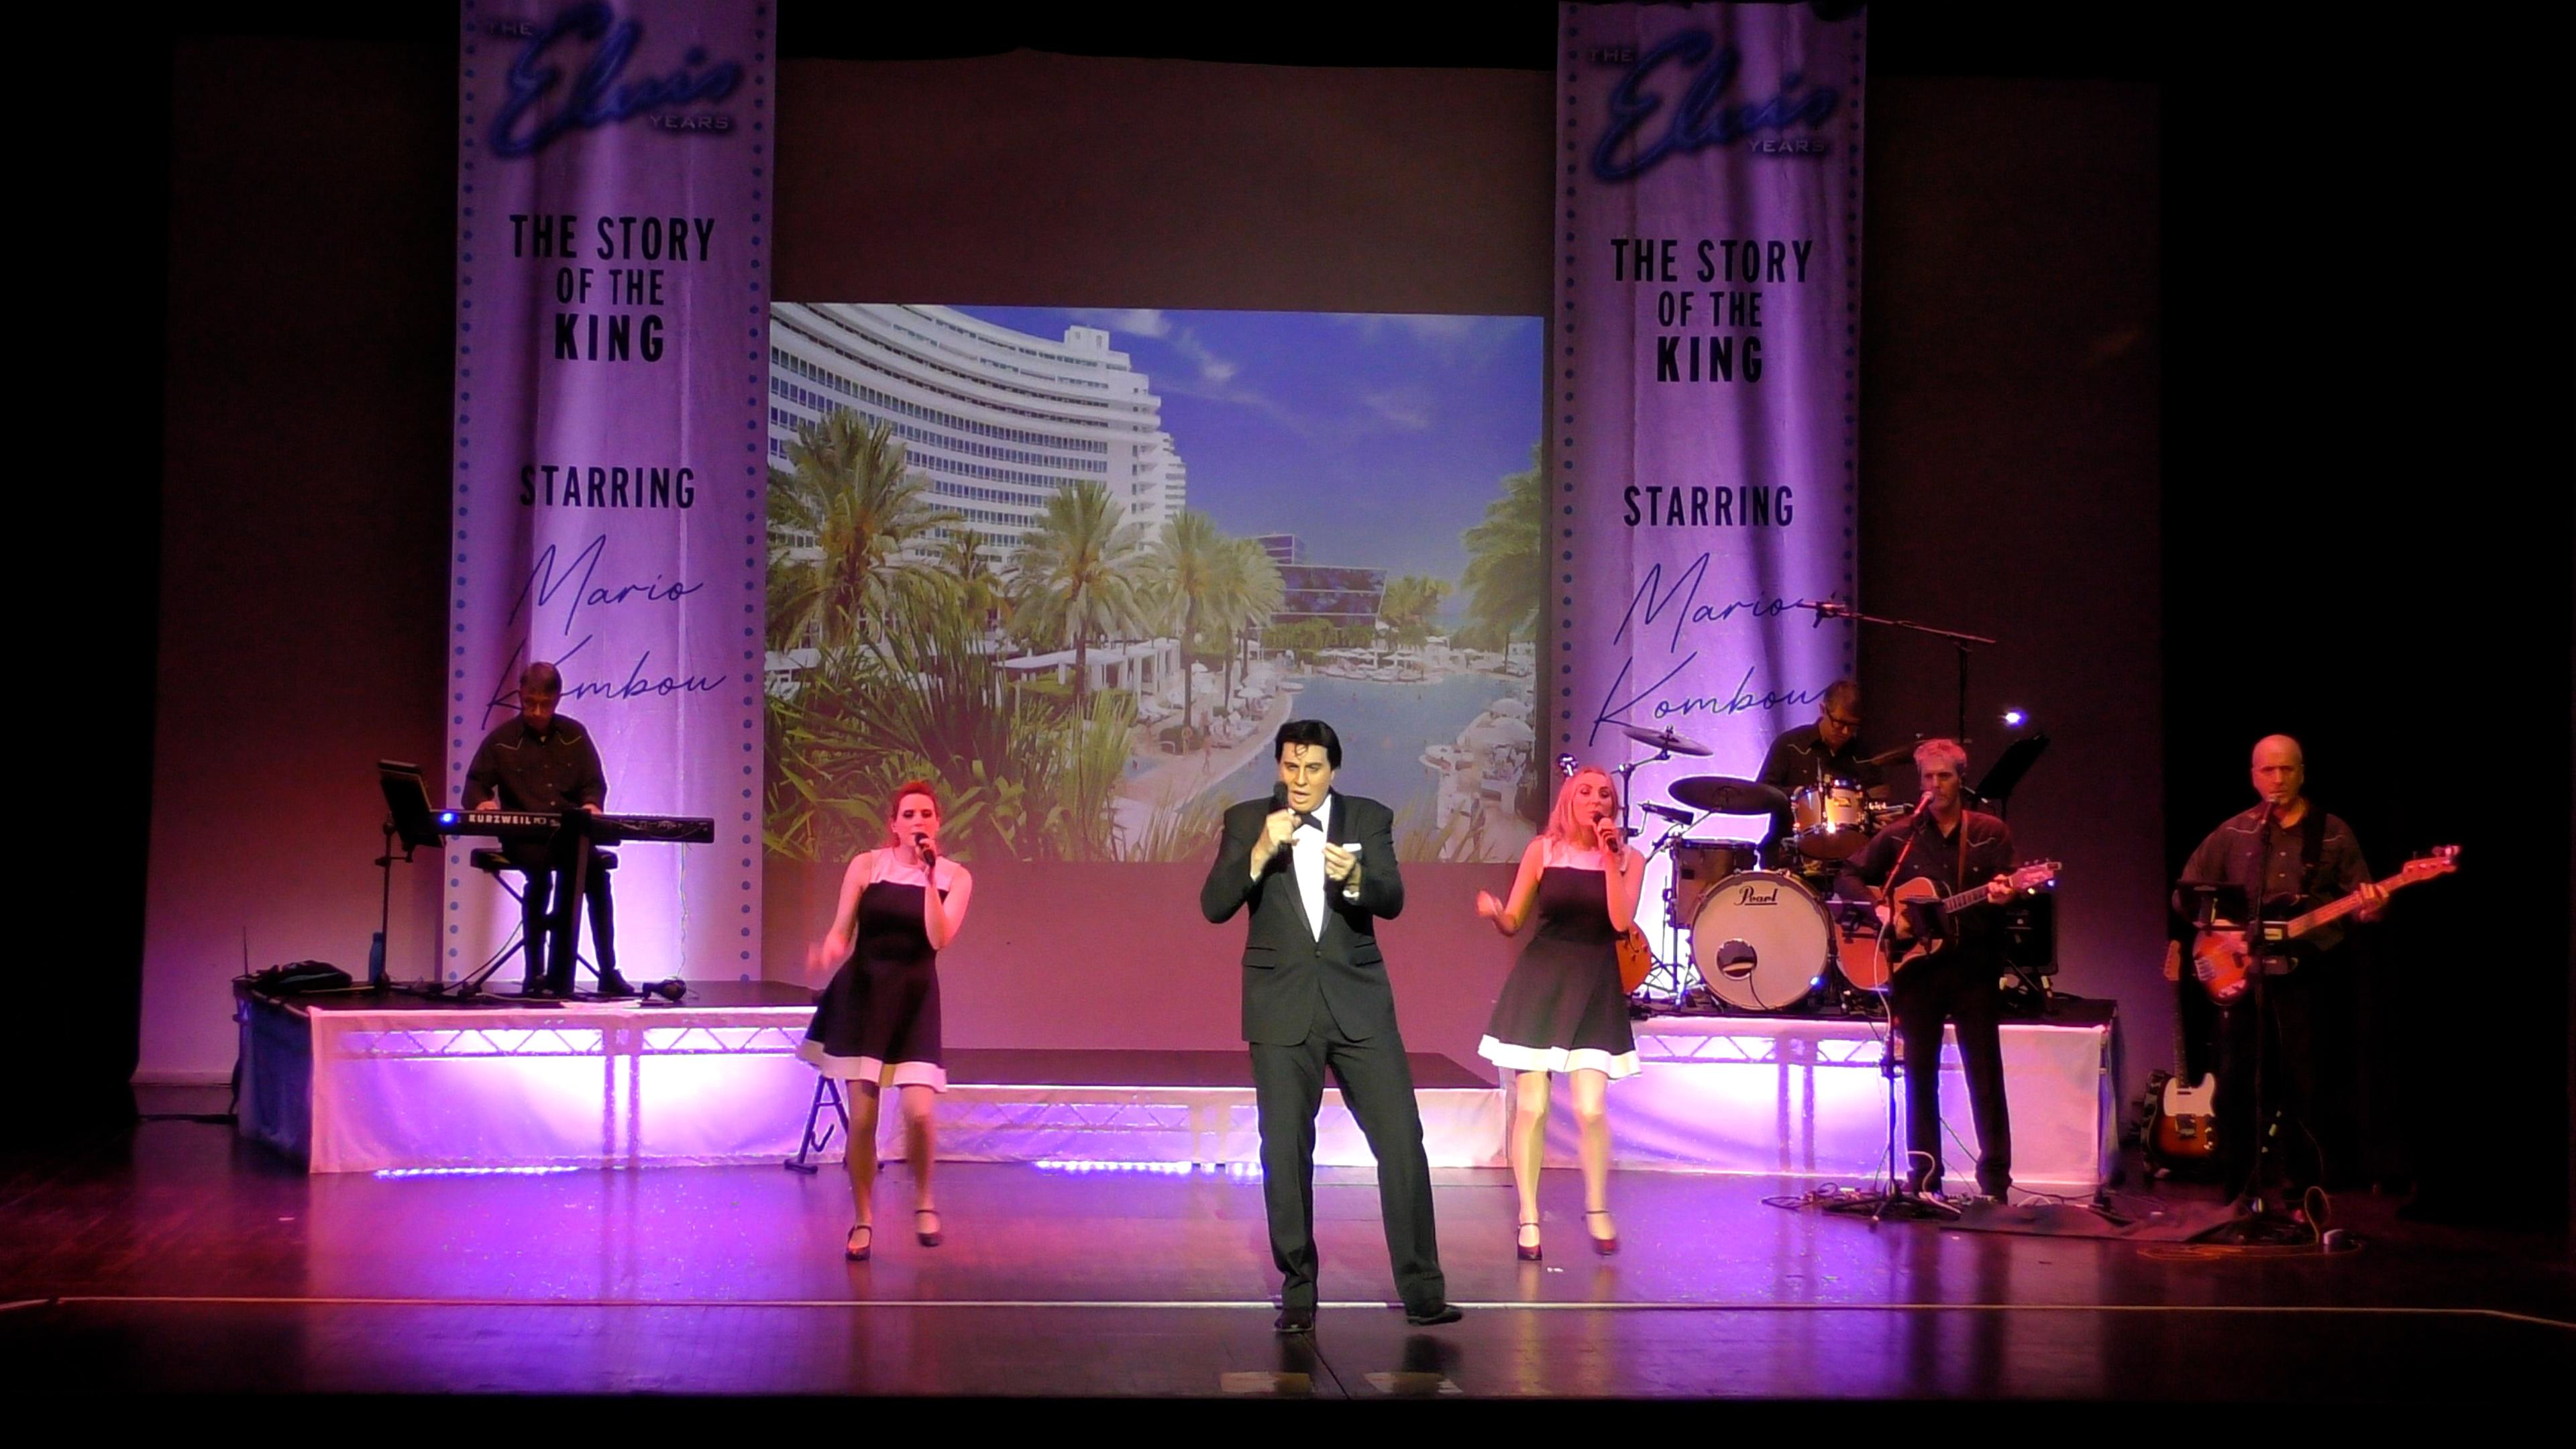 Man in evening suit singing on stage